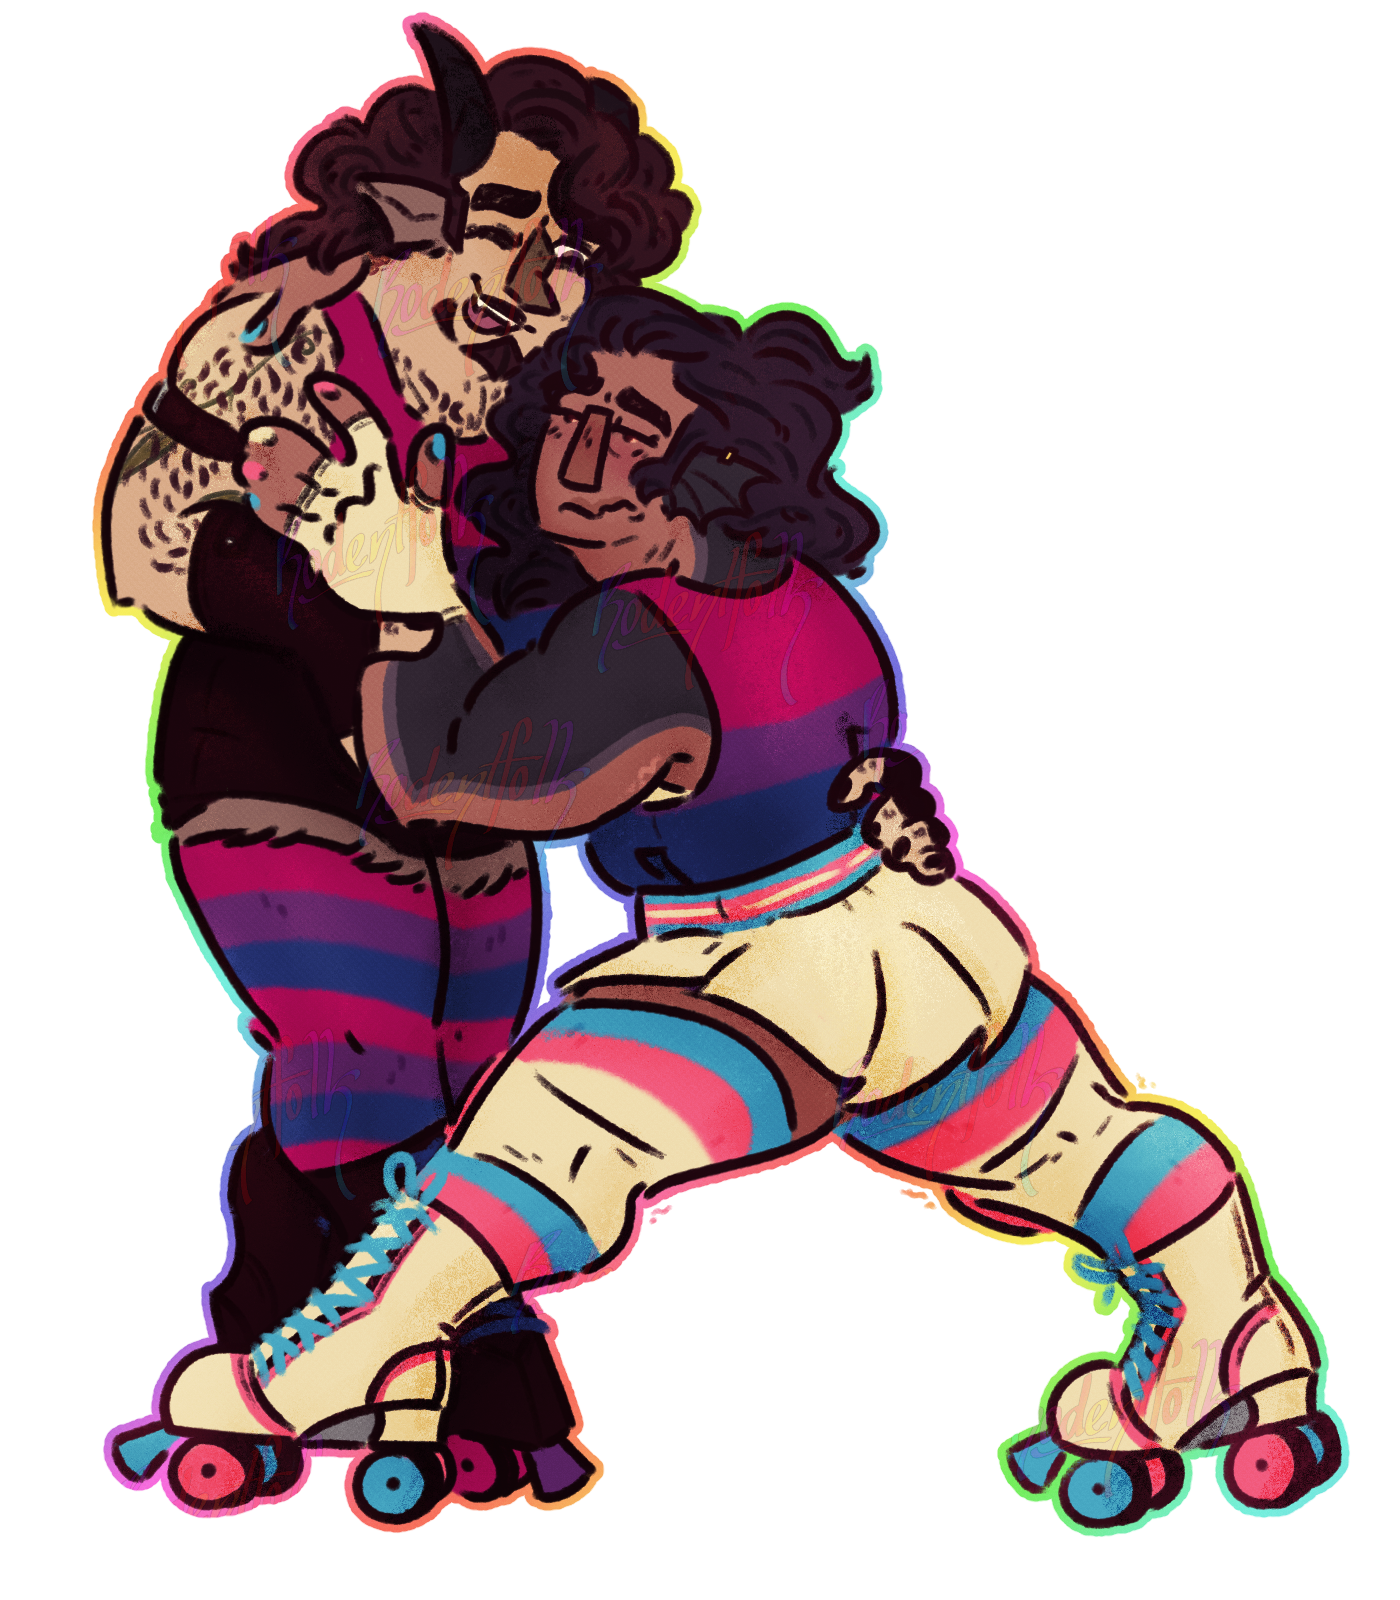 It is an illustration of the artist's characters, Monty and Beatrice. They are roller skating. Monty is helping Beatrice up as she almost slides to the floor.